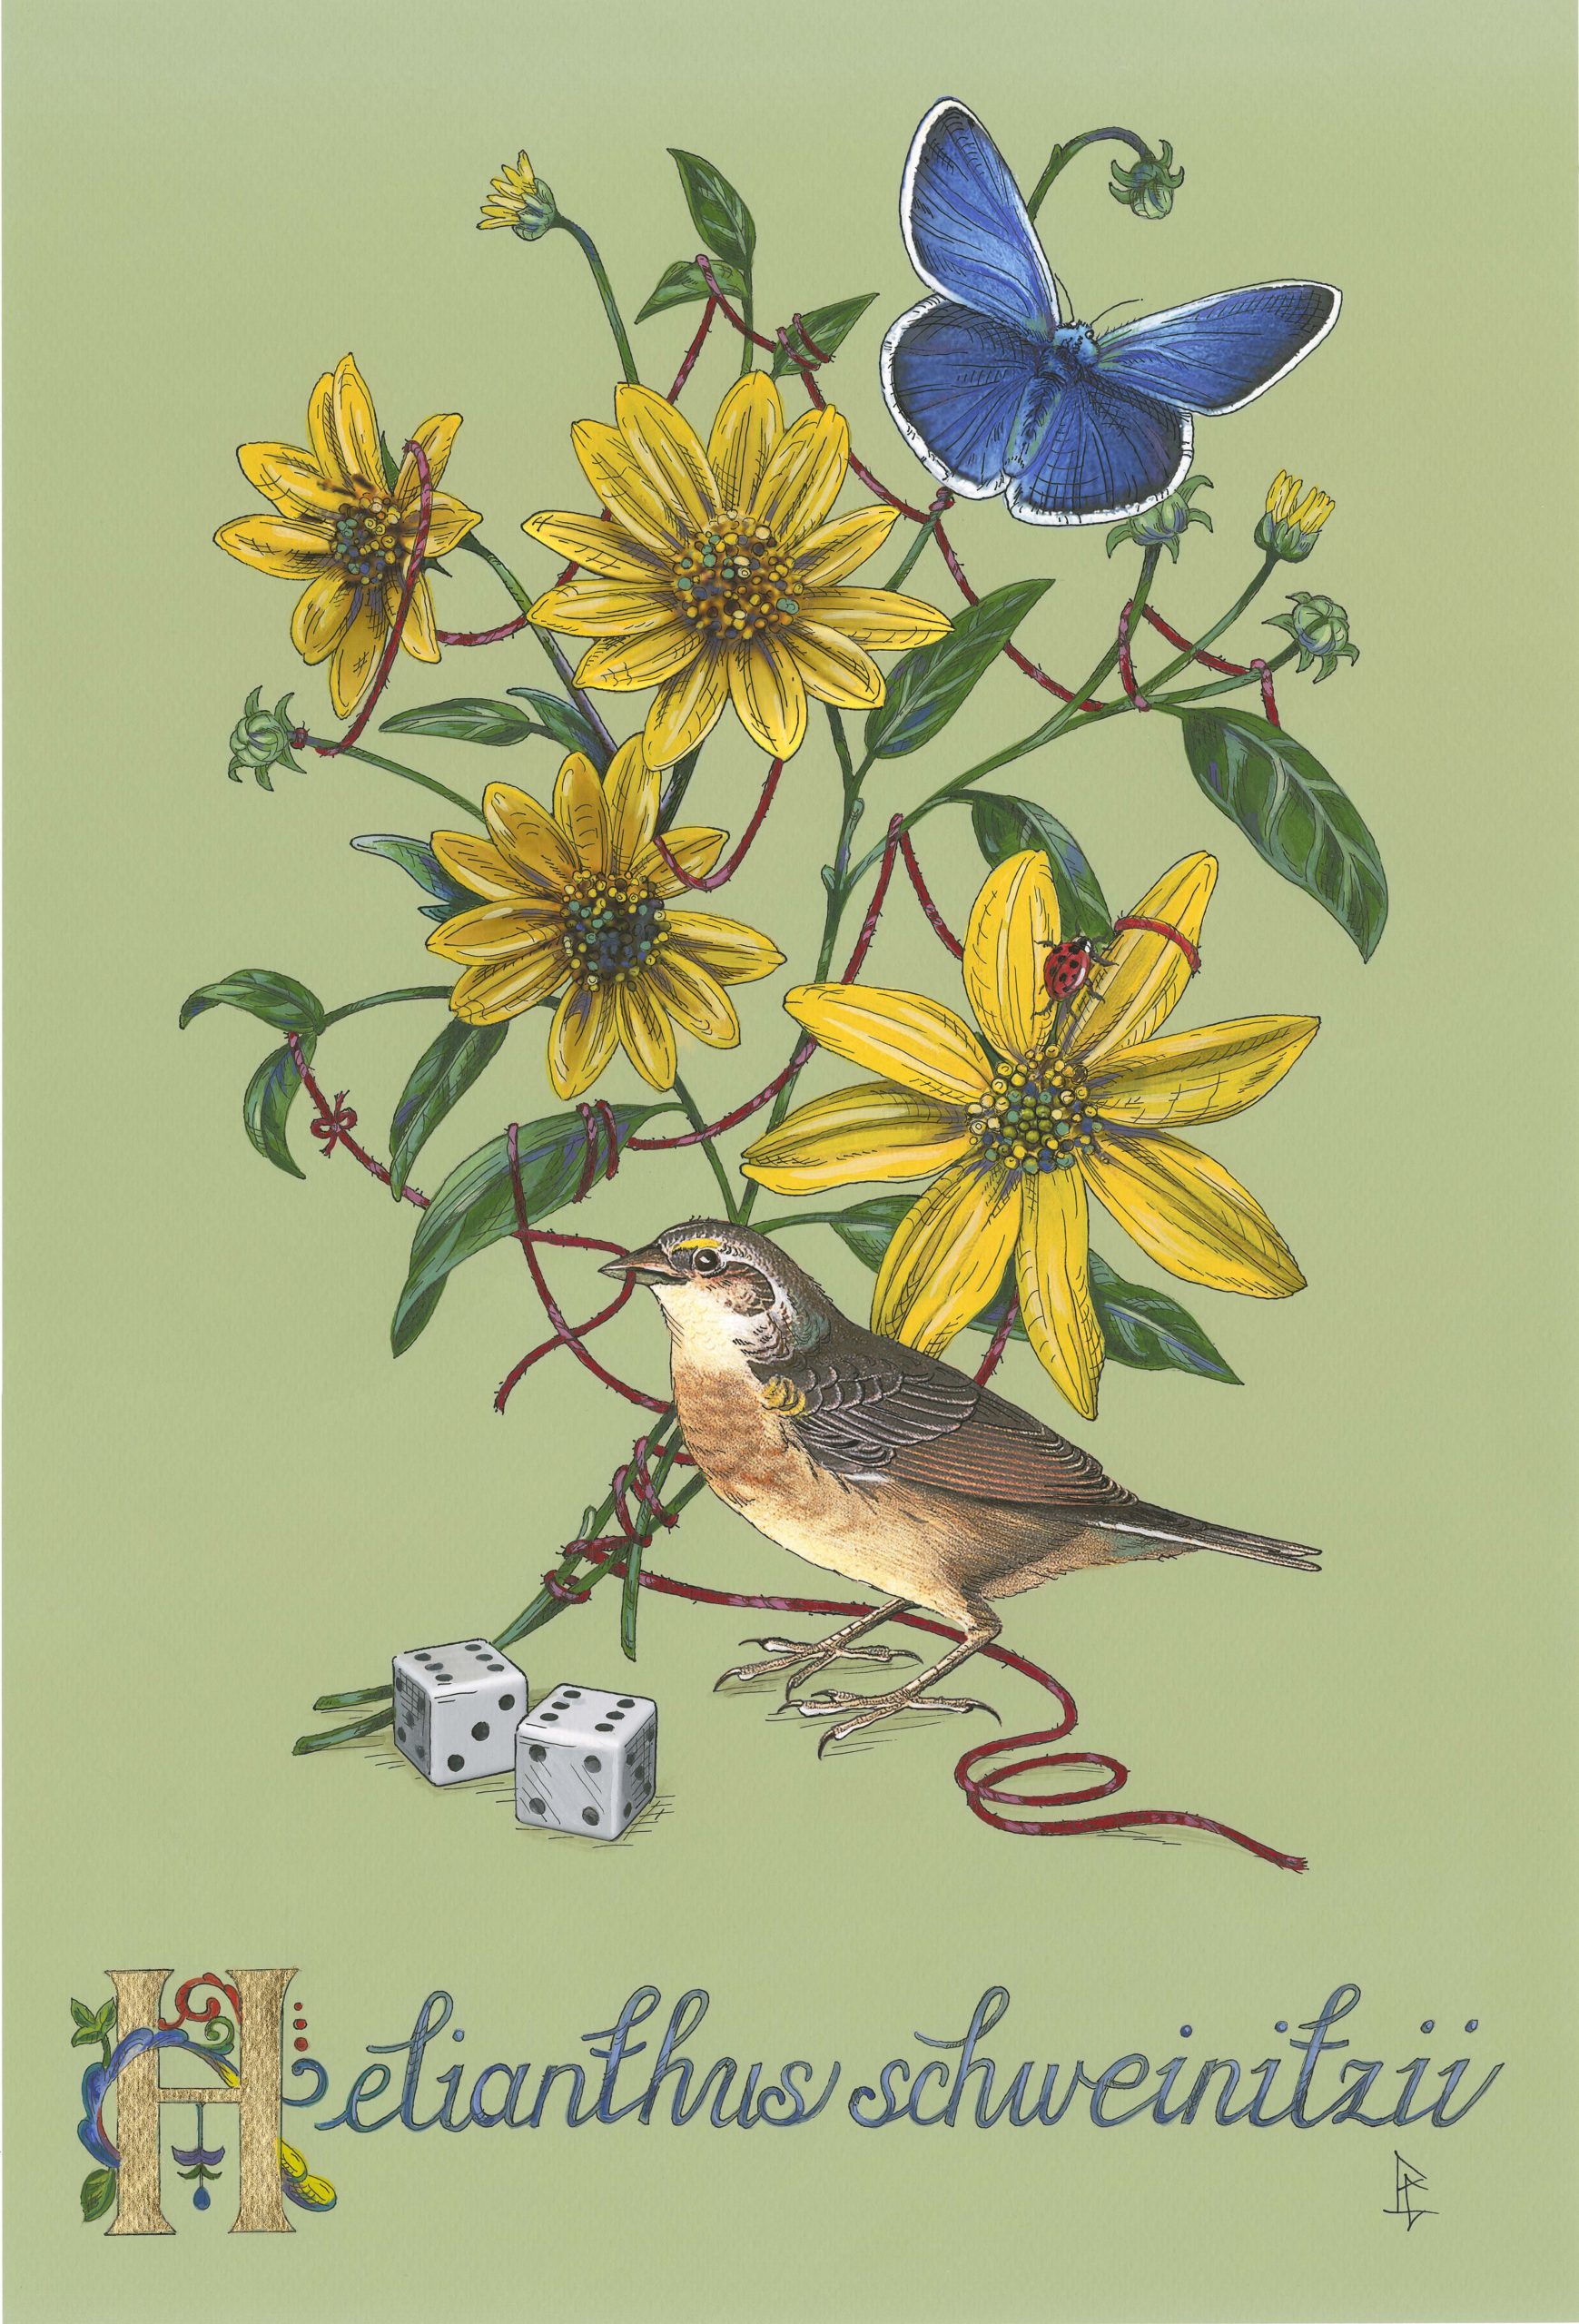 
		                					Penelope Gottlieb		                																	
																											<i>Brighamia insignis,</i>  
																																								2021, 
																																								acrylic and ink over a digital reproduction of an Audubon print, 
																																								18 x 12 inches 
																								
		                				